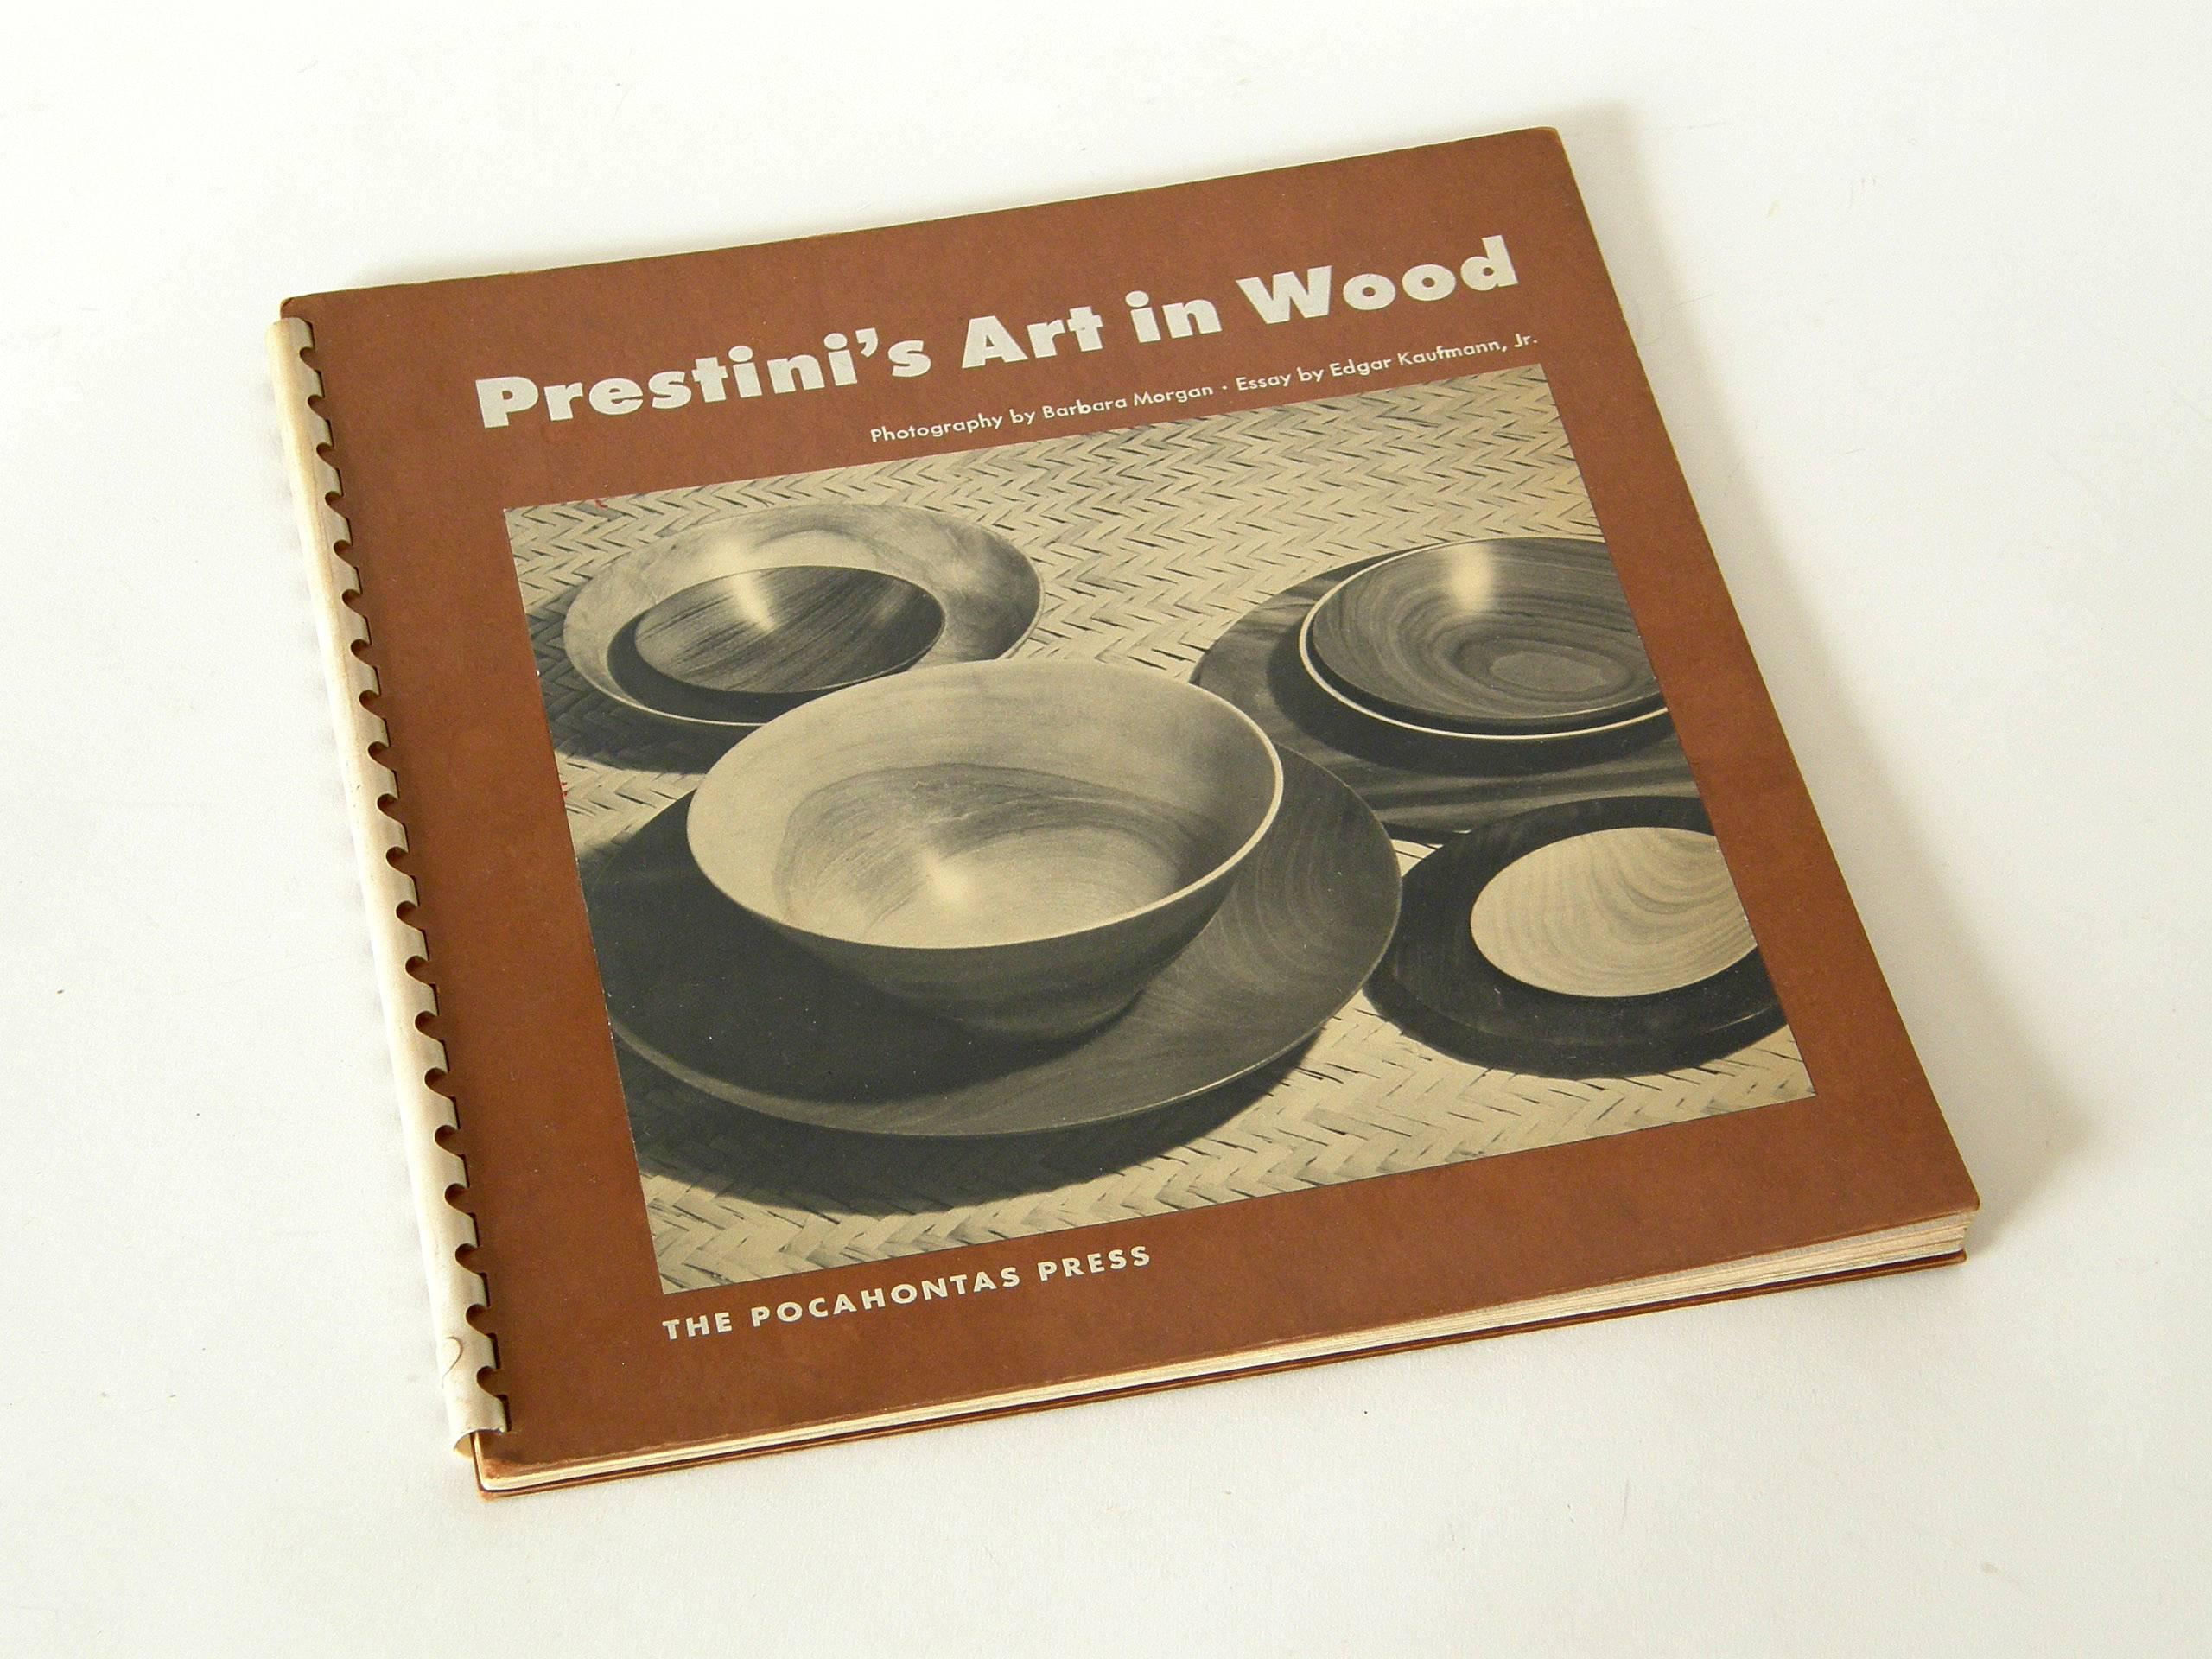 This monograph on James Prestini has an essay by Edgar Kaufmann Jr. and numerous, beautiful photographs by Barbara Morgan of Prestini's exquisite turned wood objects and experimental sculptures. The book is a first edition from a limited run of 1000